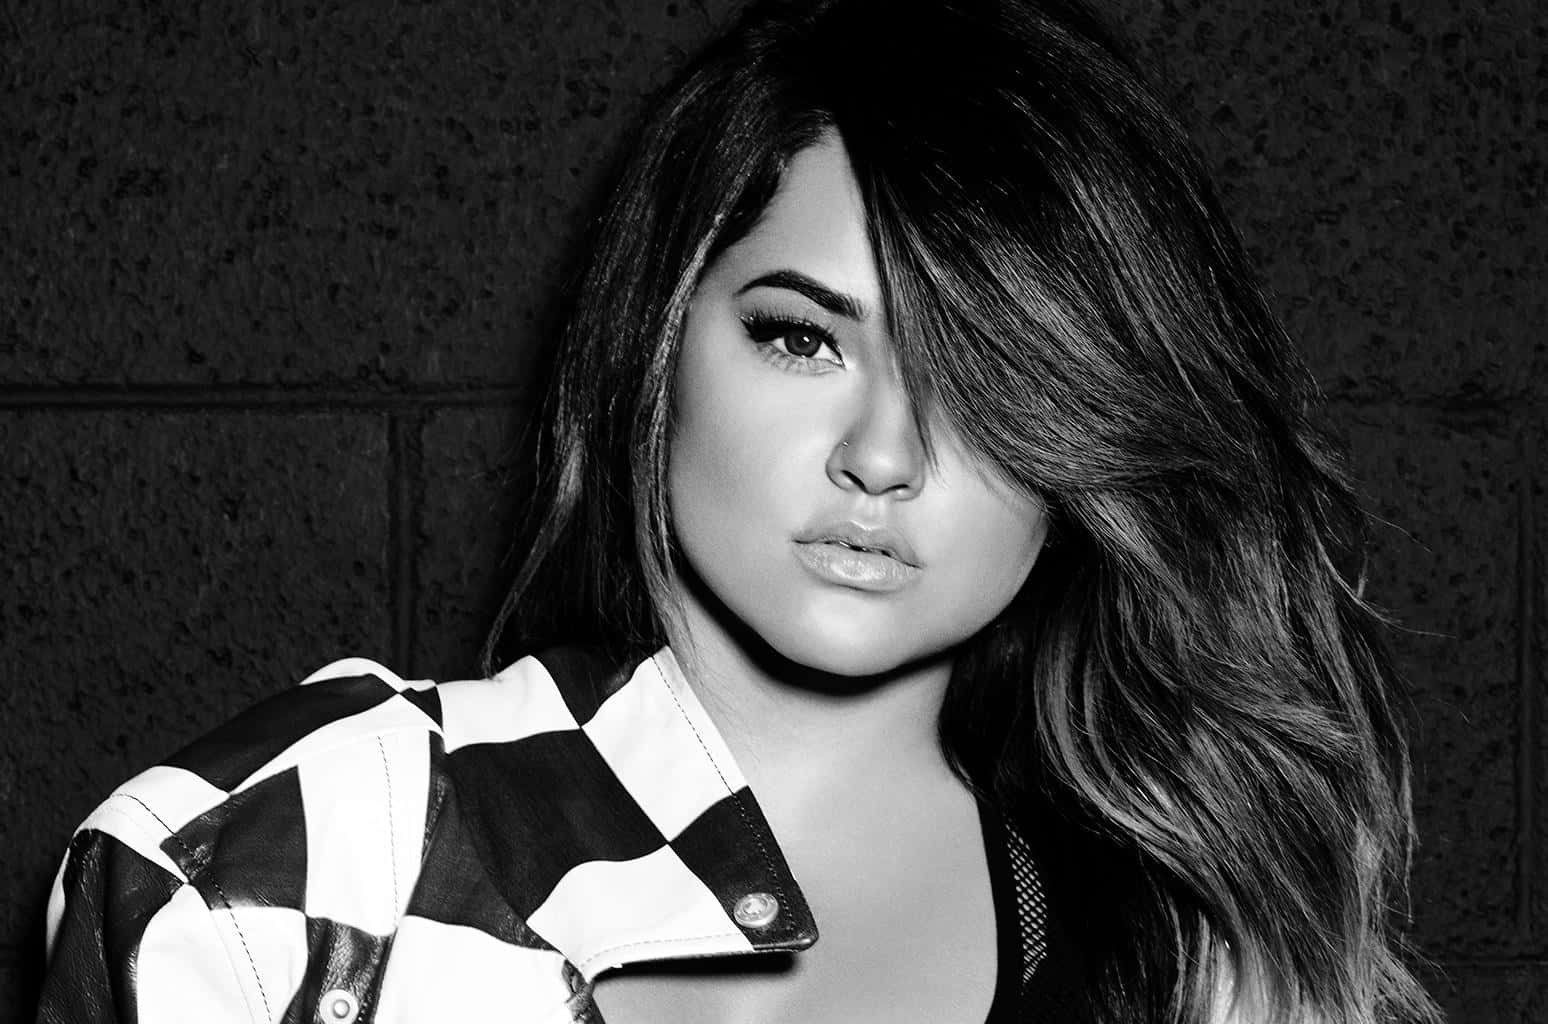 Singer Becky G flaunts her powerful vocals and style in her new single.